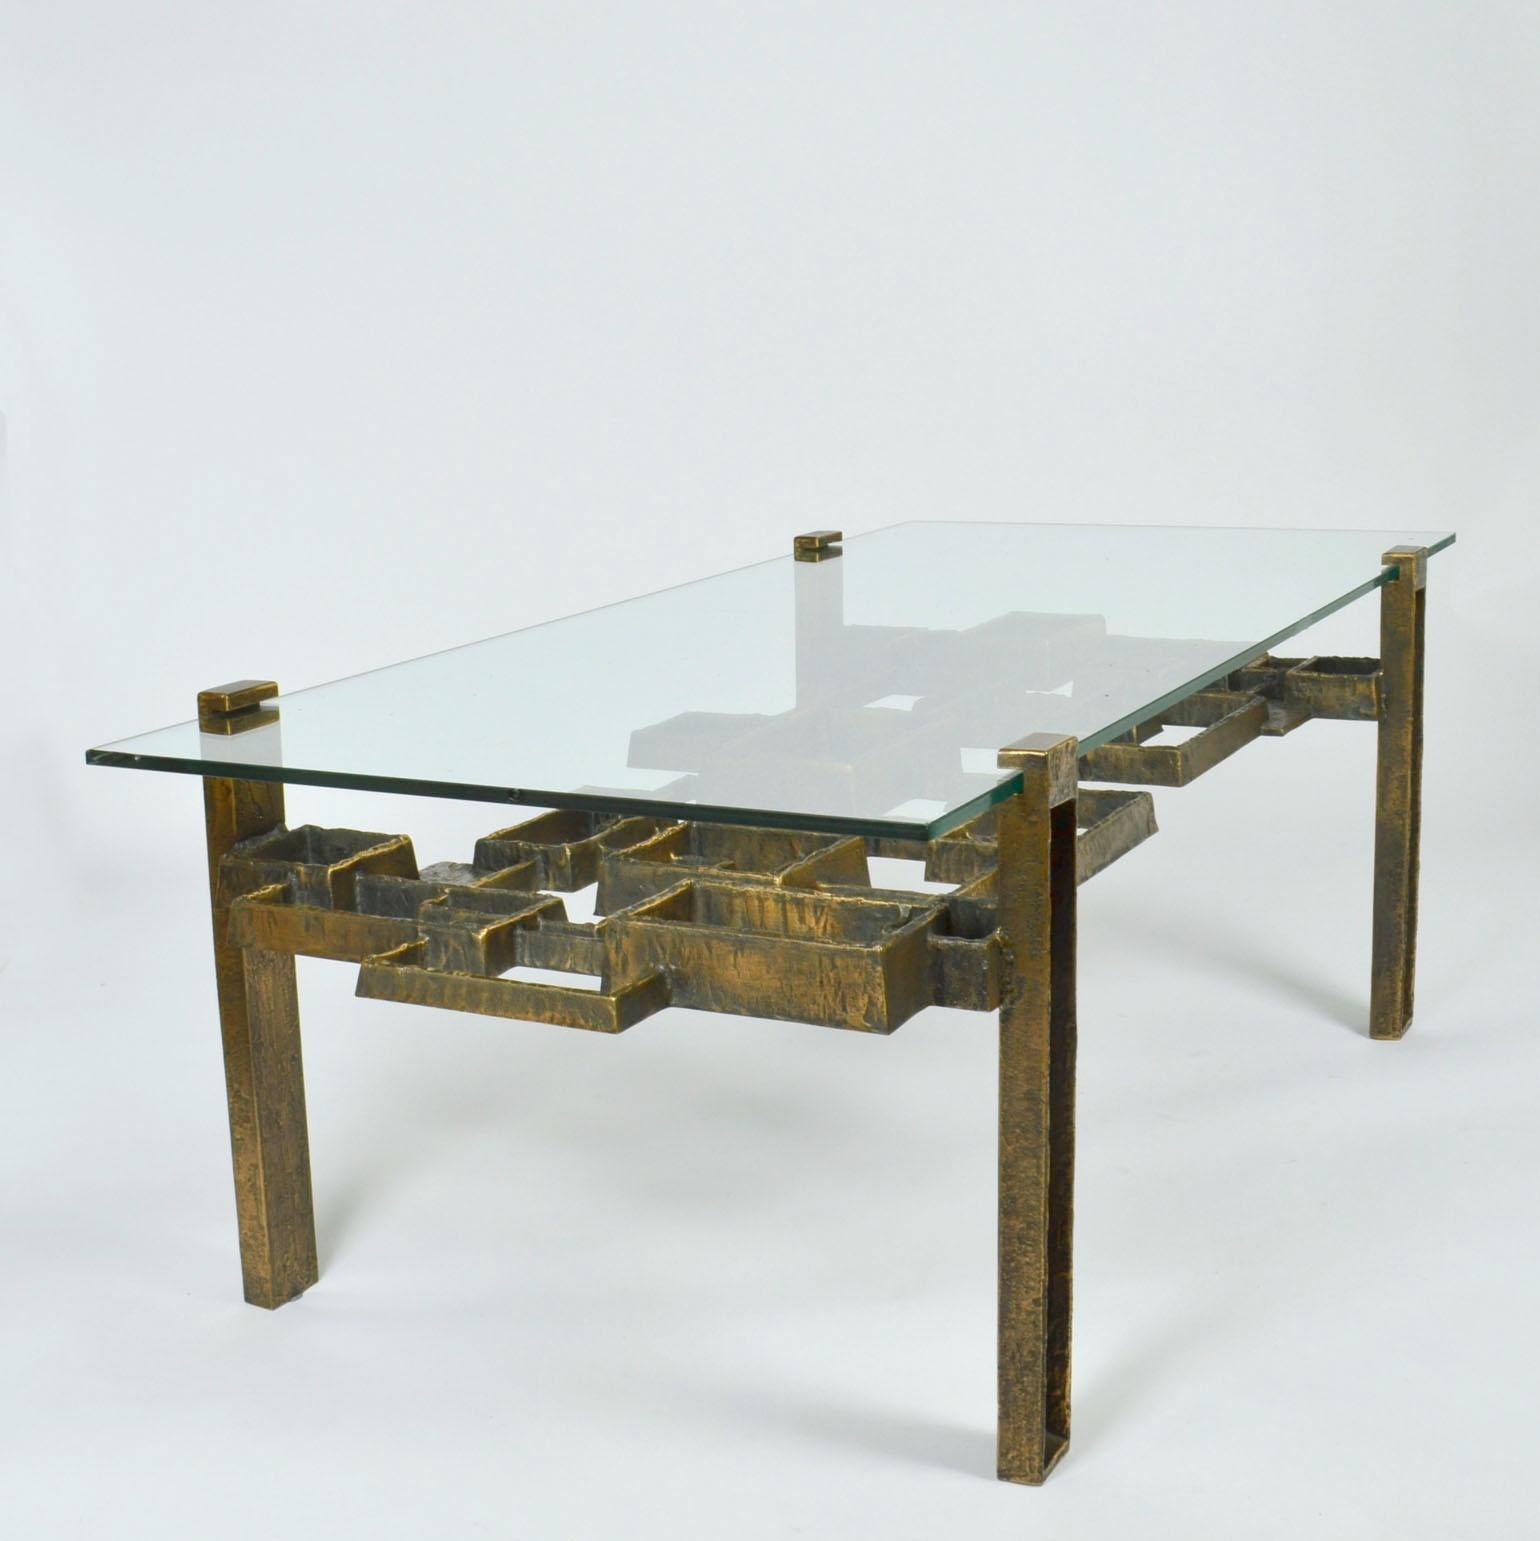 European Sculpted Bronze Coffee Table with glass Top 1970's For Sale